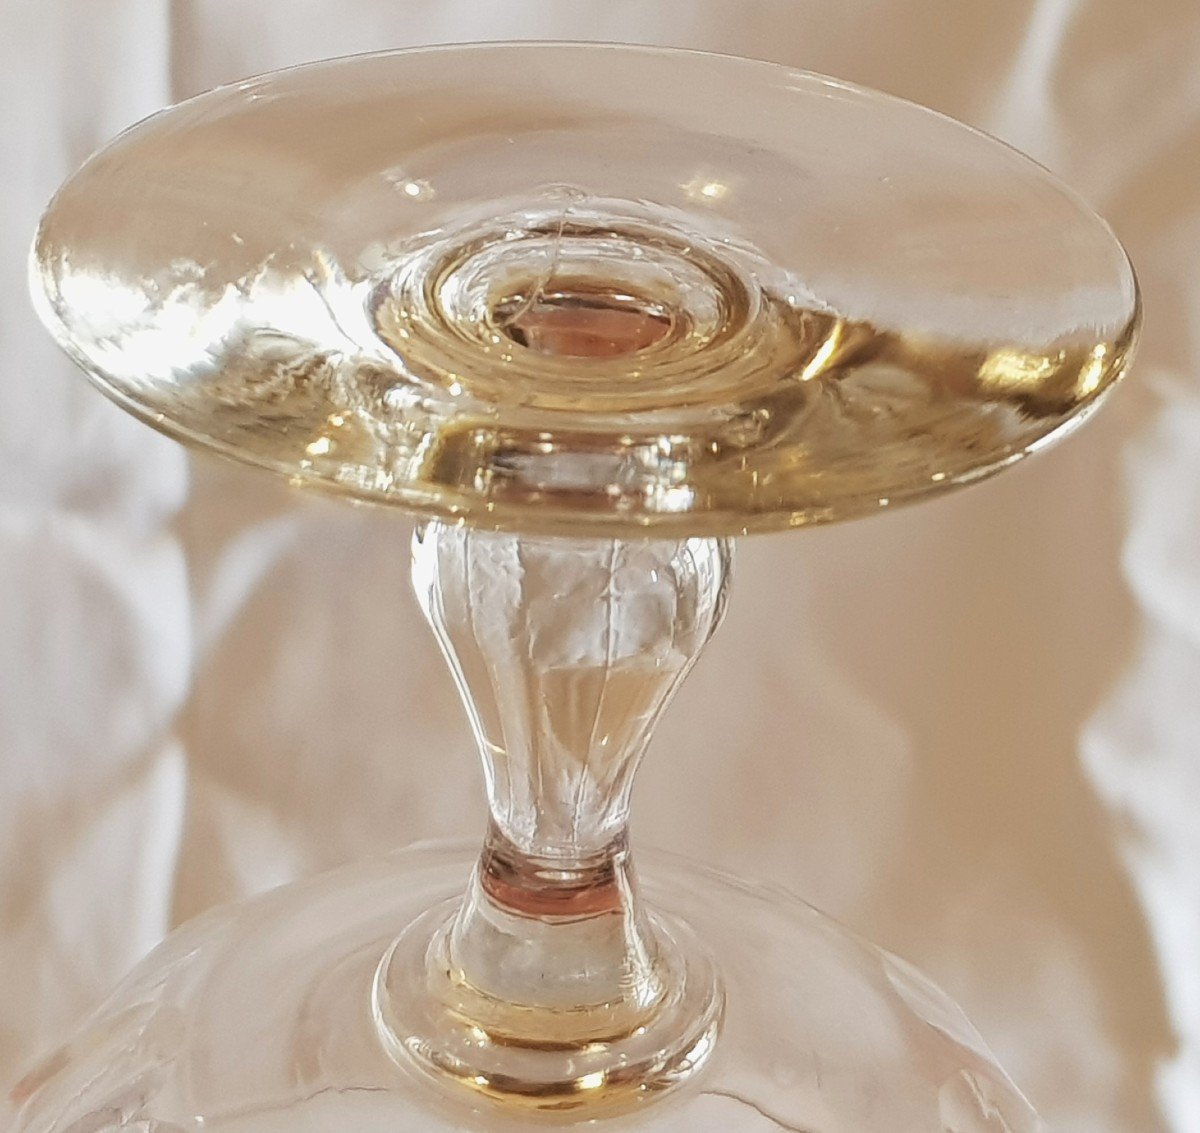 Series Of 6 Antique Cut Crystal Champagne Glasses From The End Of The 19th Century-photo-5